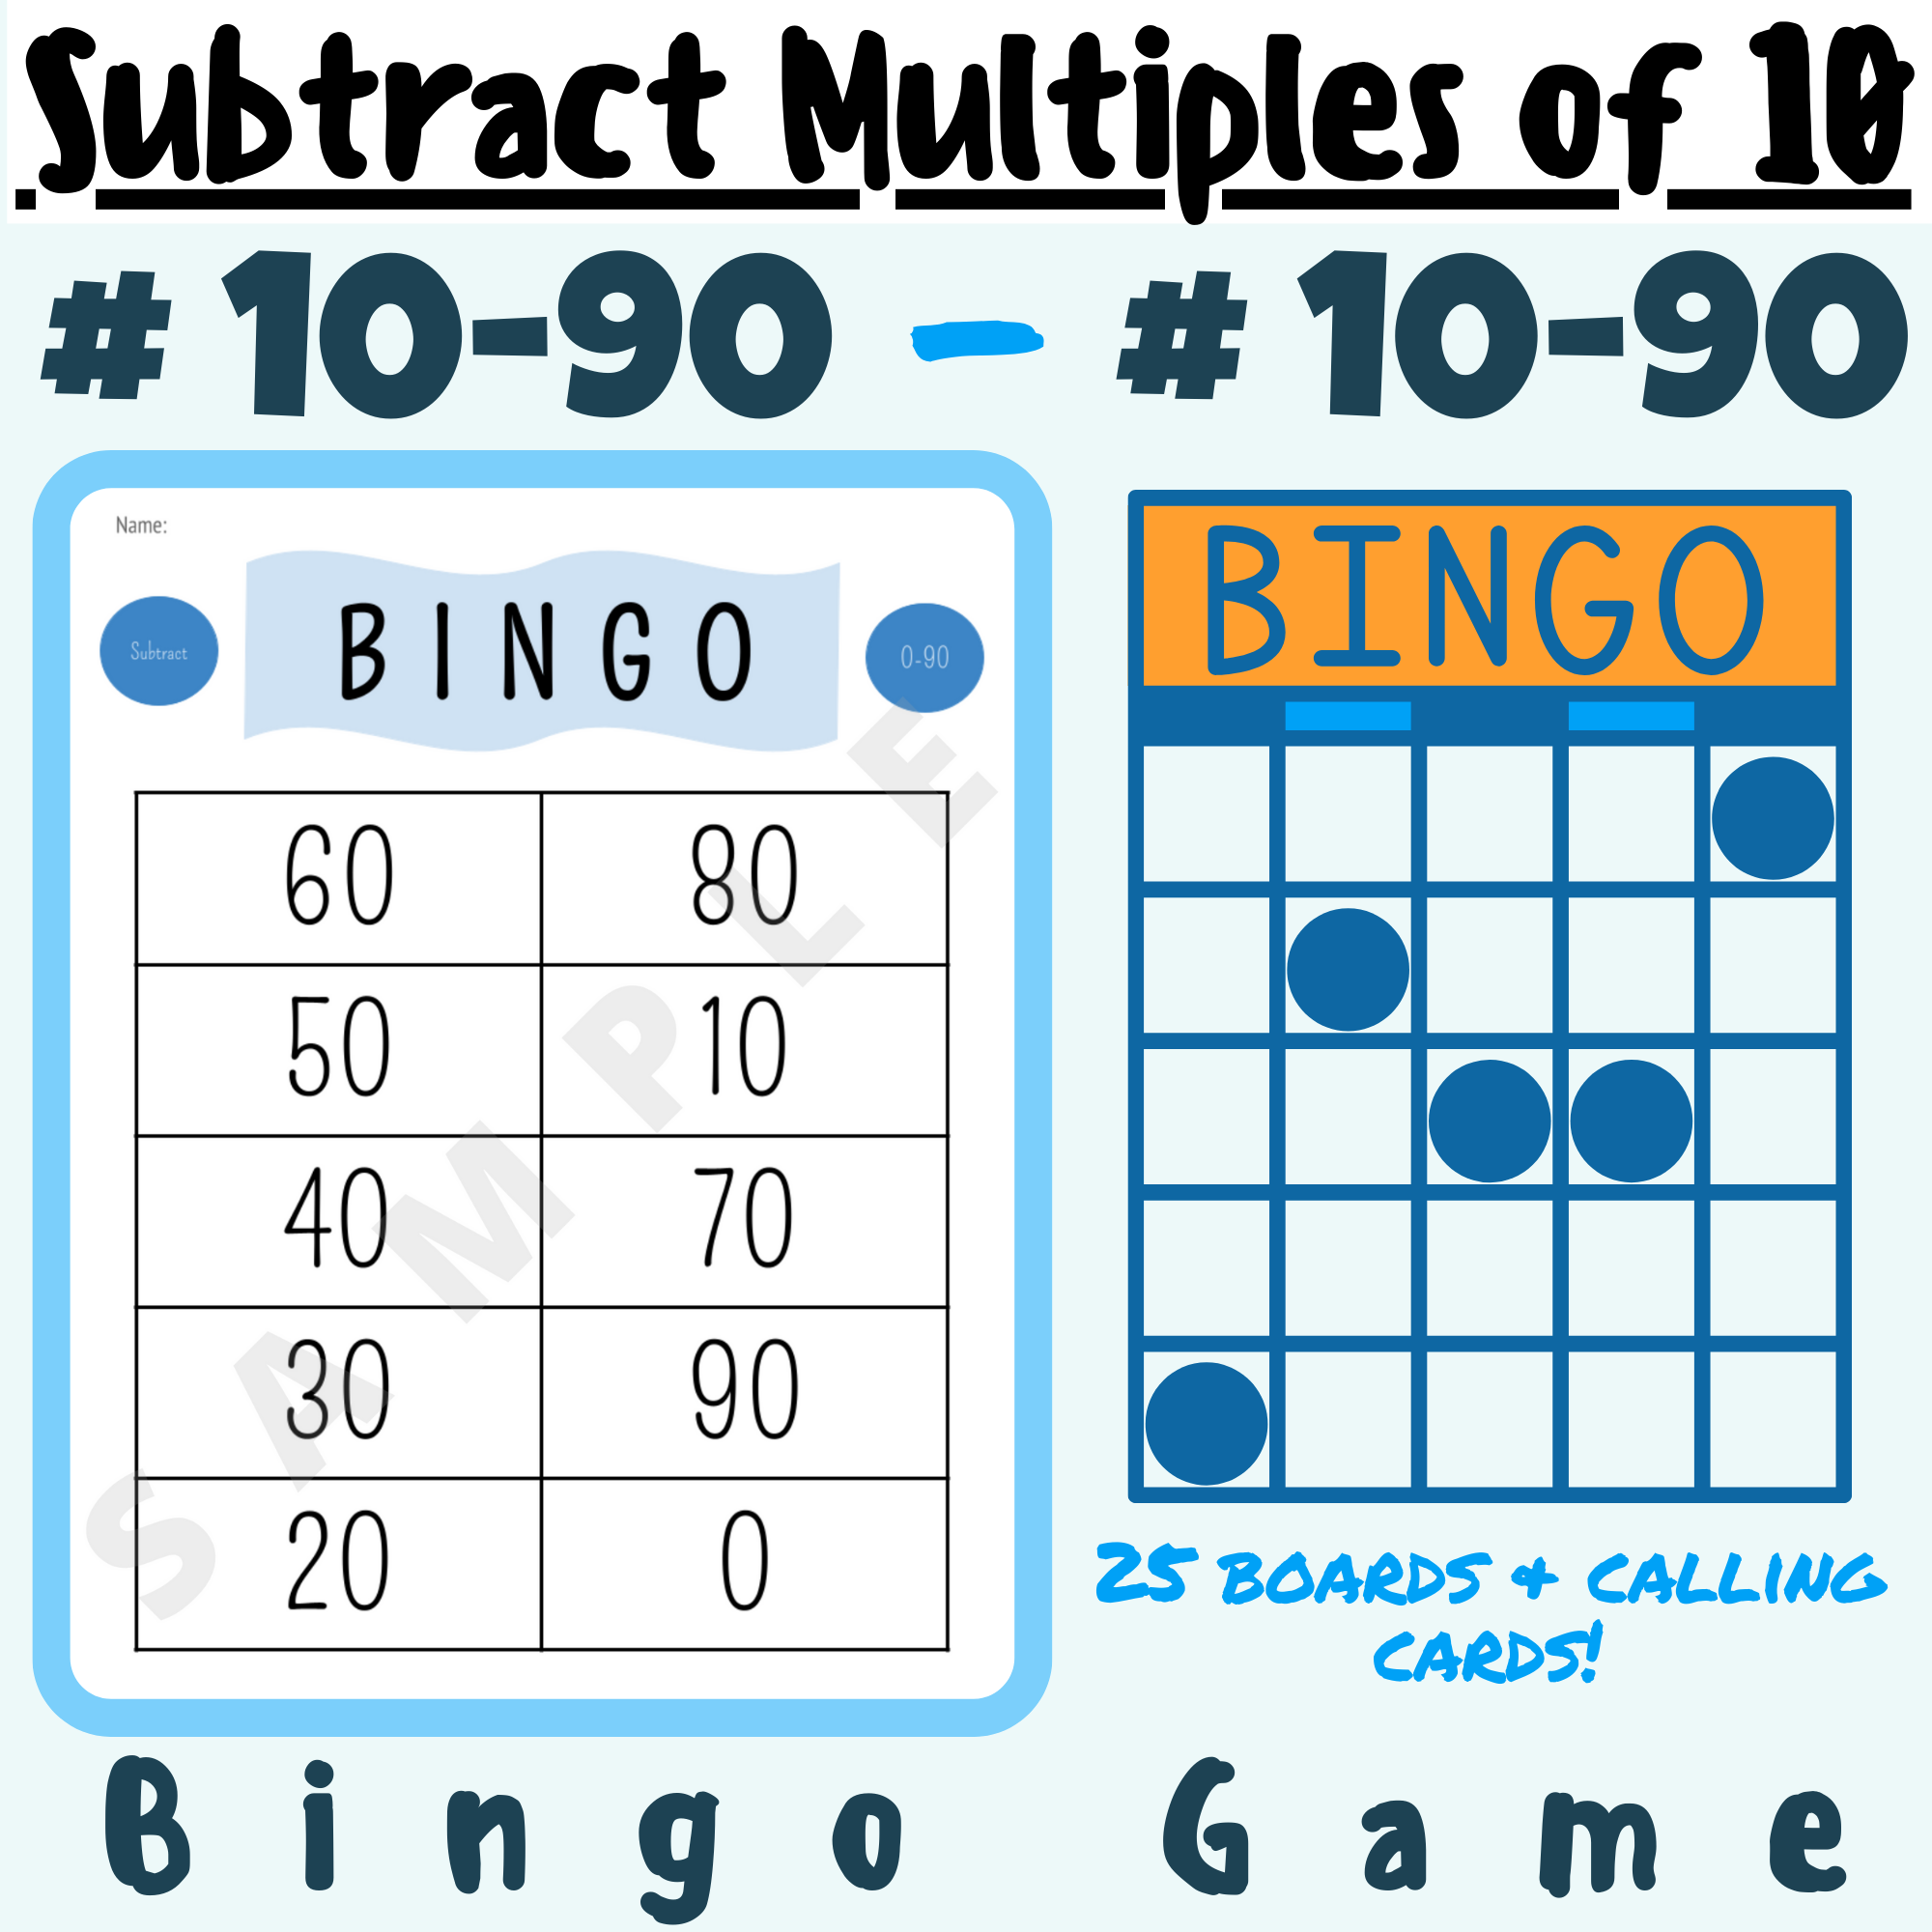 Subtract Multiples of 10 (#10-90) Base Ten, Place Value BINGO GAME 1.NBT.C6; For K-5 Teachers and Students in the Math Classroom's featured image